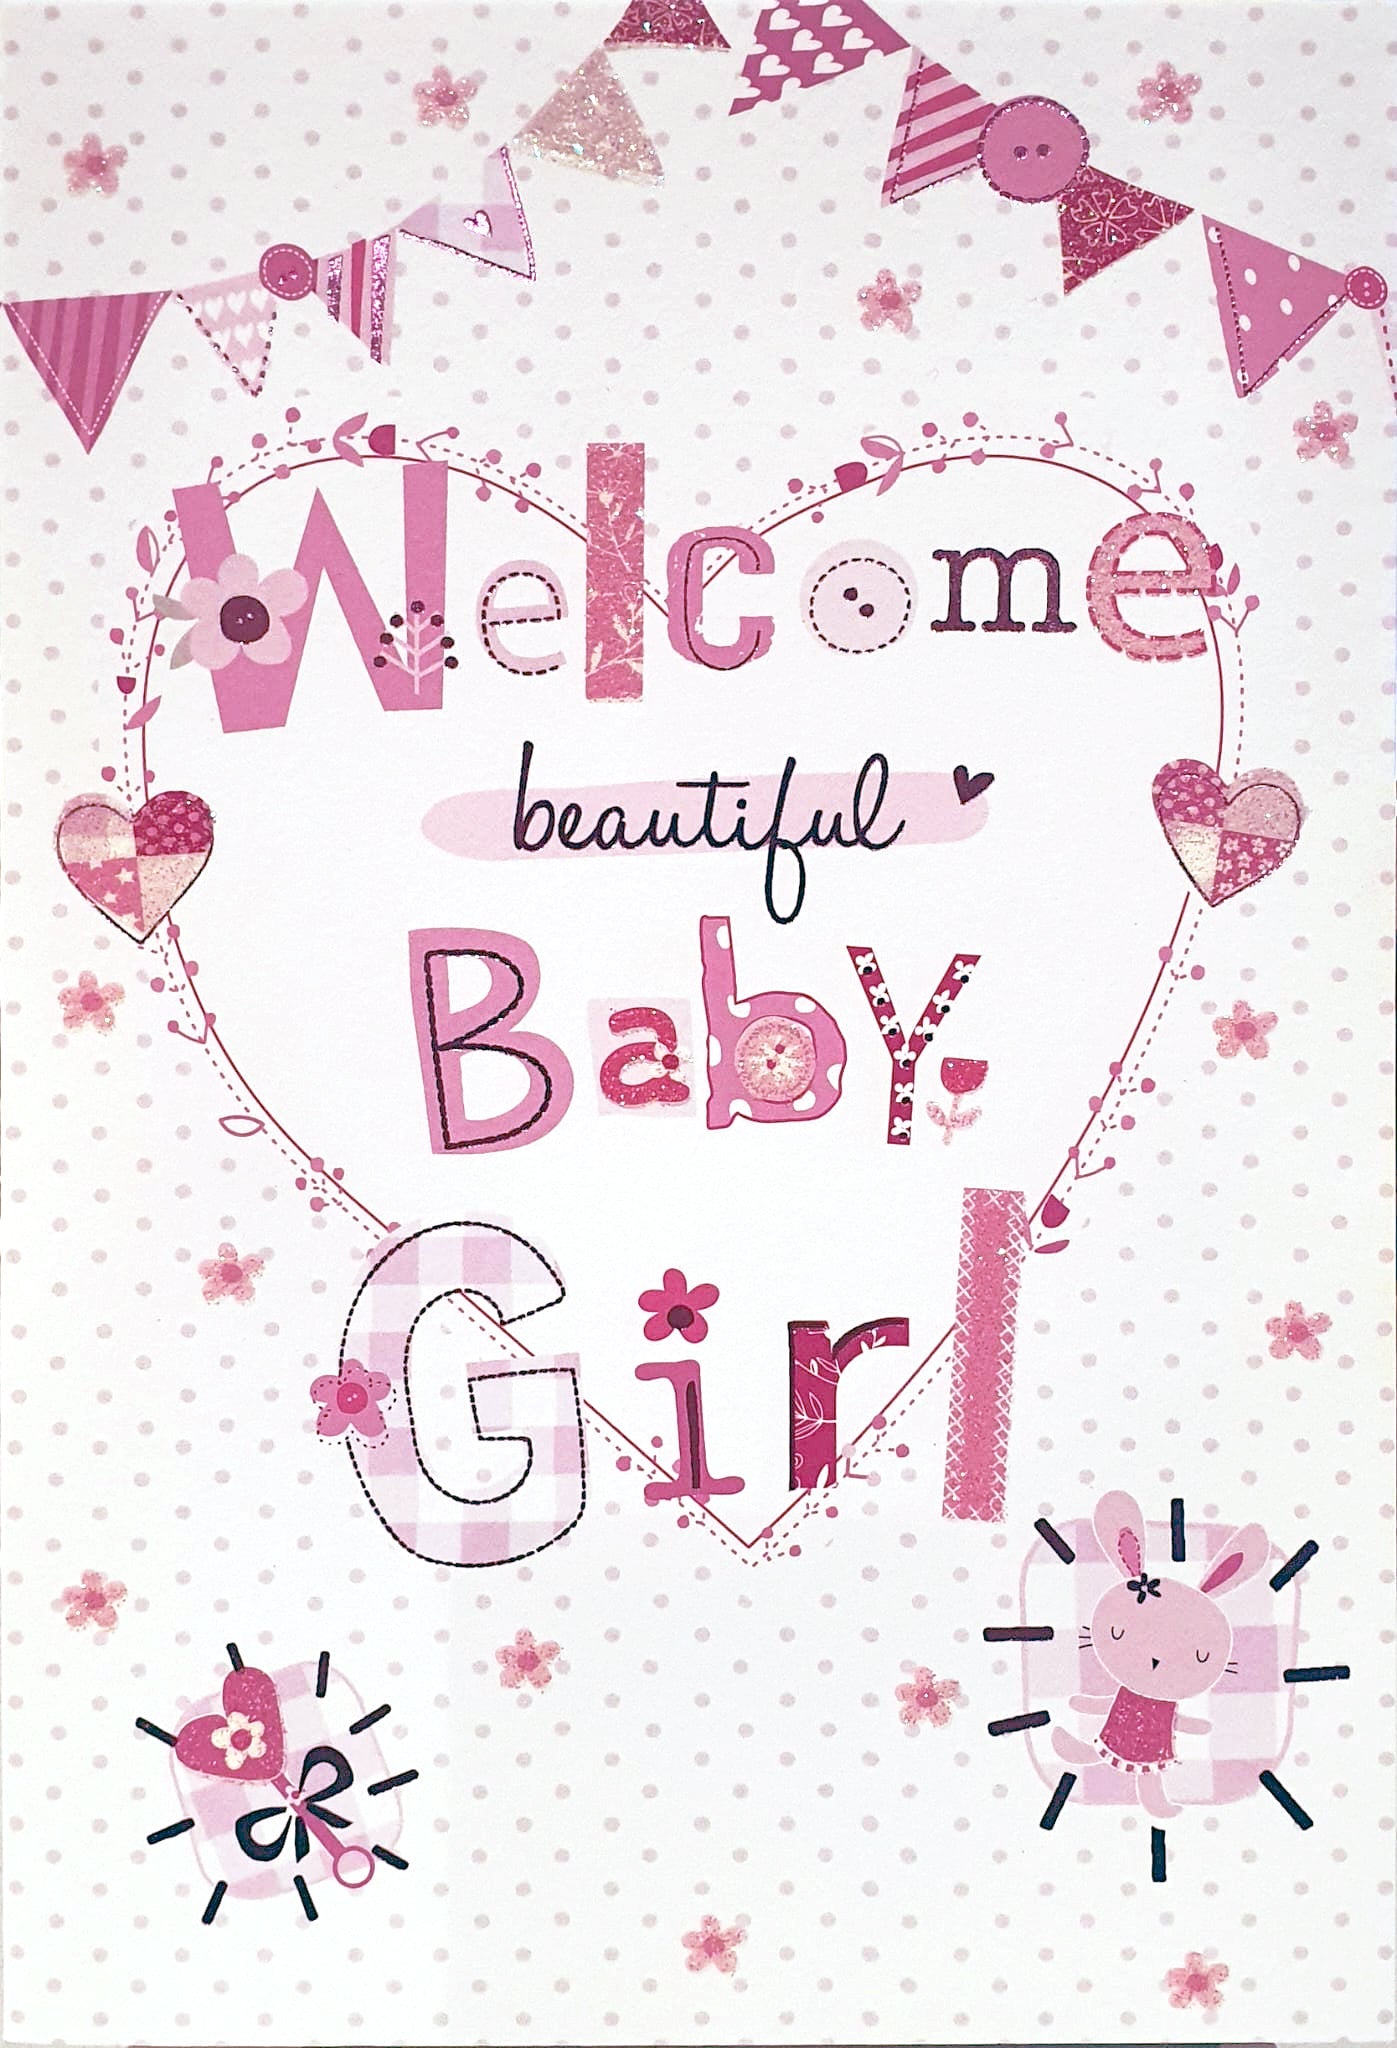 New Baby Girl Card - A Collage Of Baby Happiness